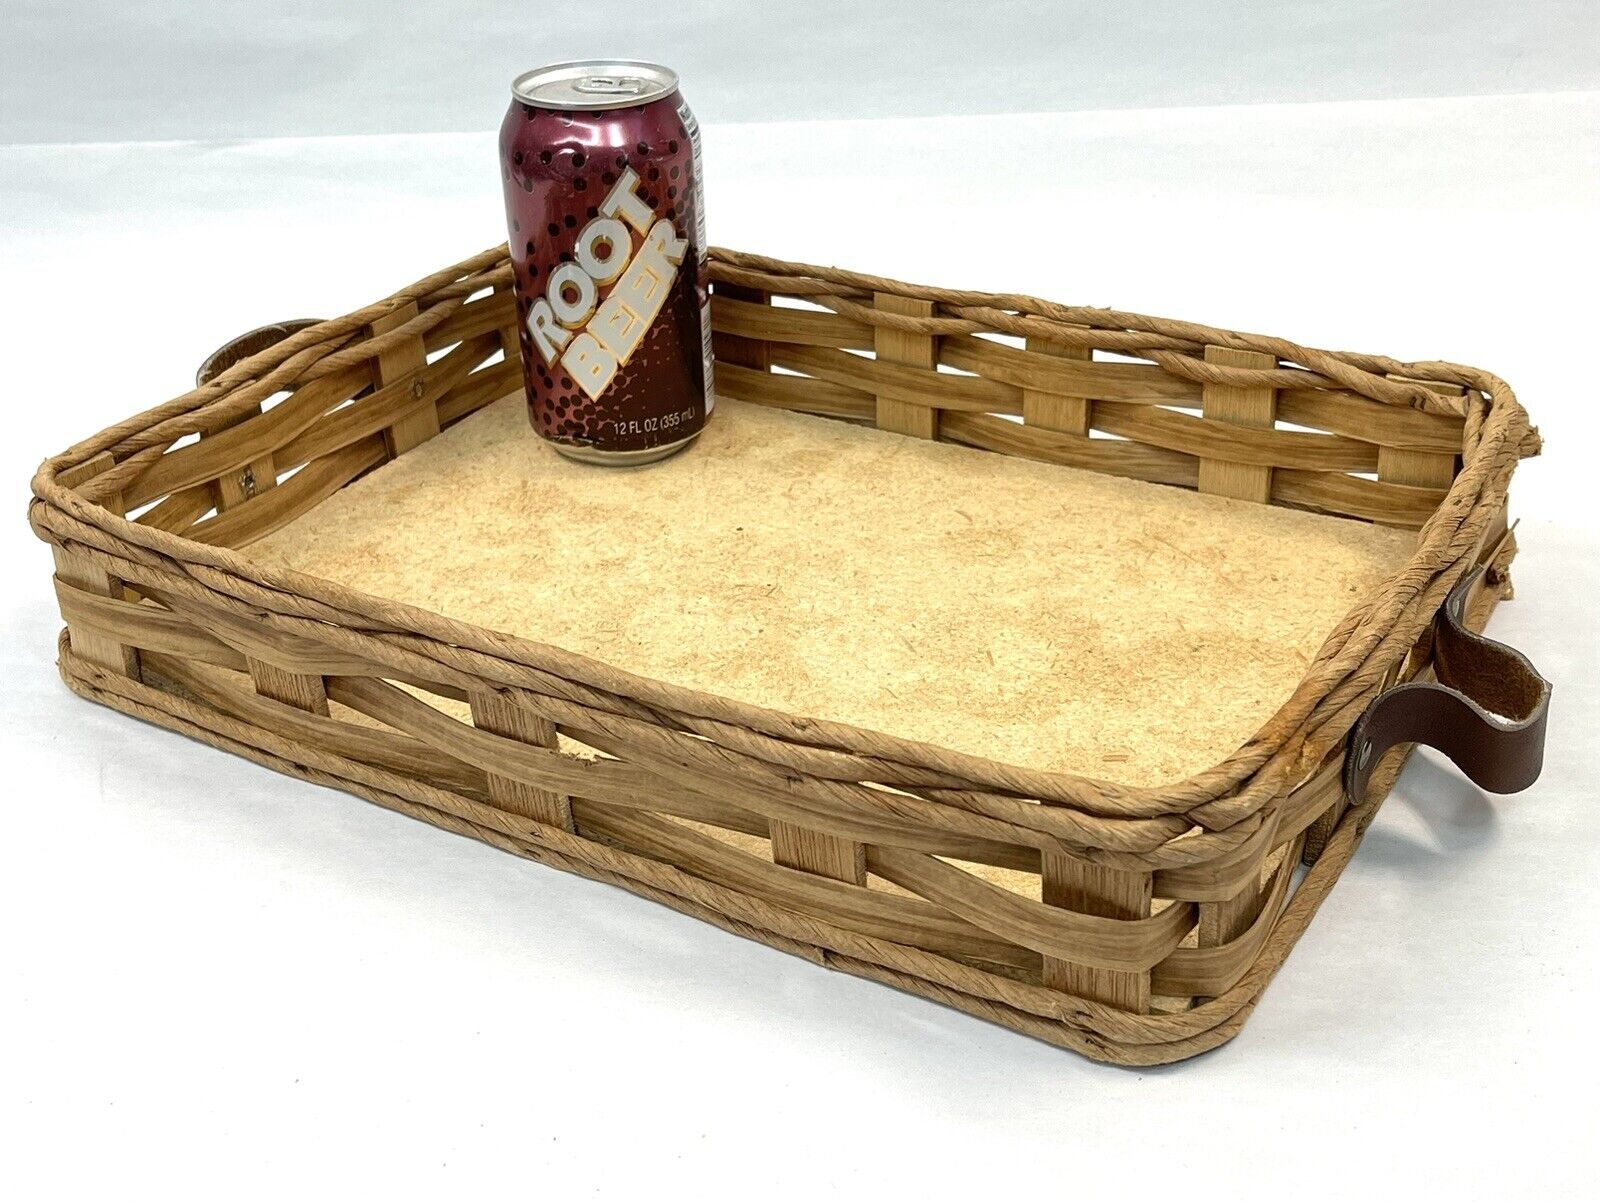 Pyrex Wicker Carrier Woven Rectangular Basket Leather Handles #233N Basket Only